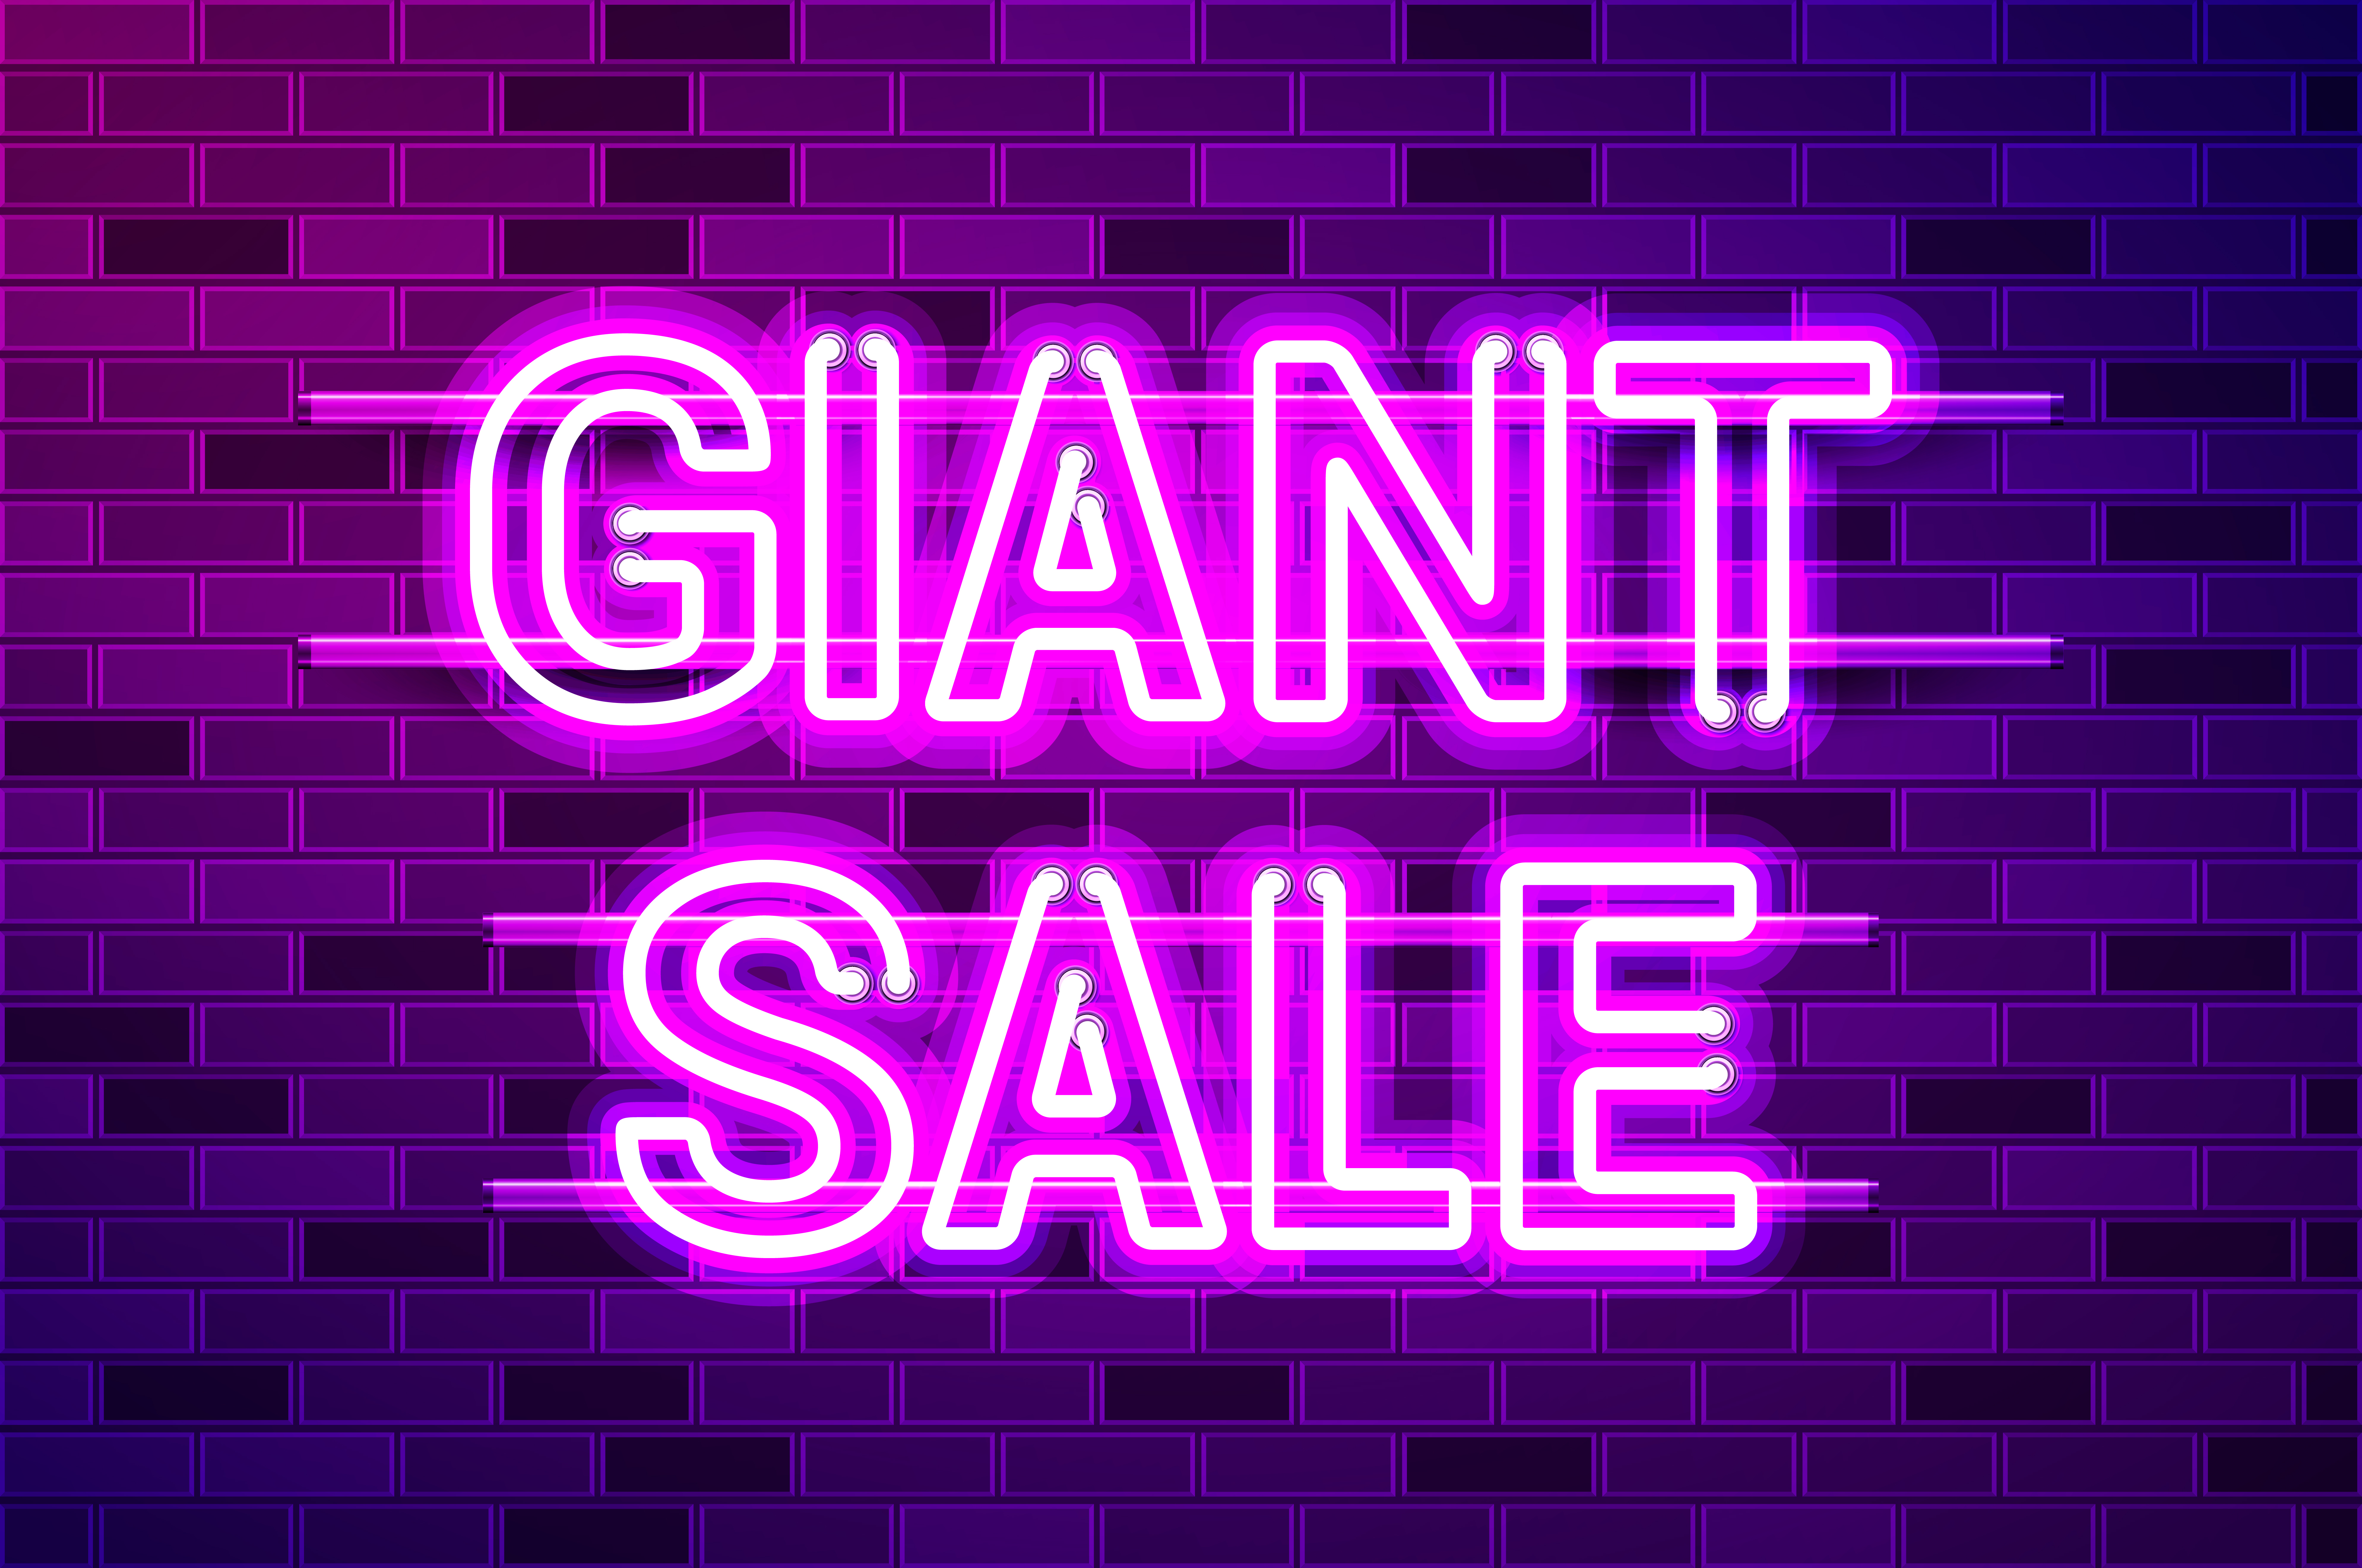 GIANT SALE glowing neon lamp sign. Realistic vector illustration. Purple brick wall, violet glow, metal holders.. GIANT SALE glowing purple neon lamp sign